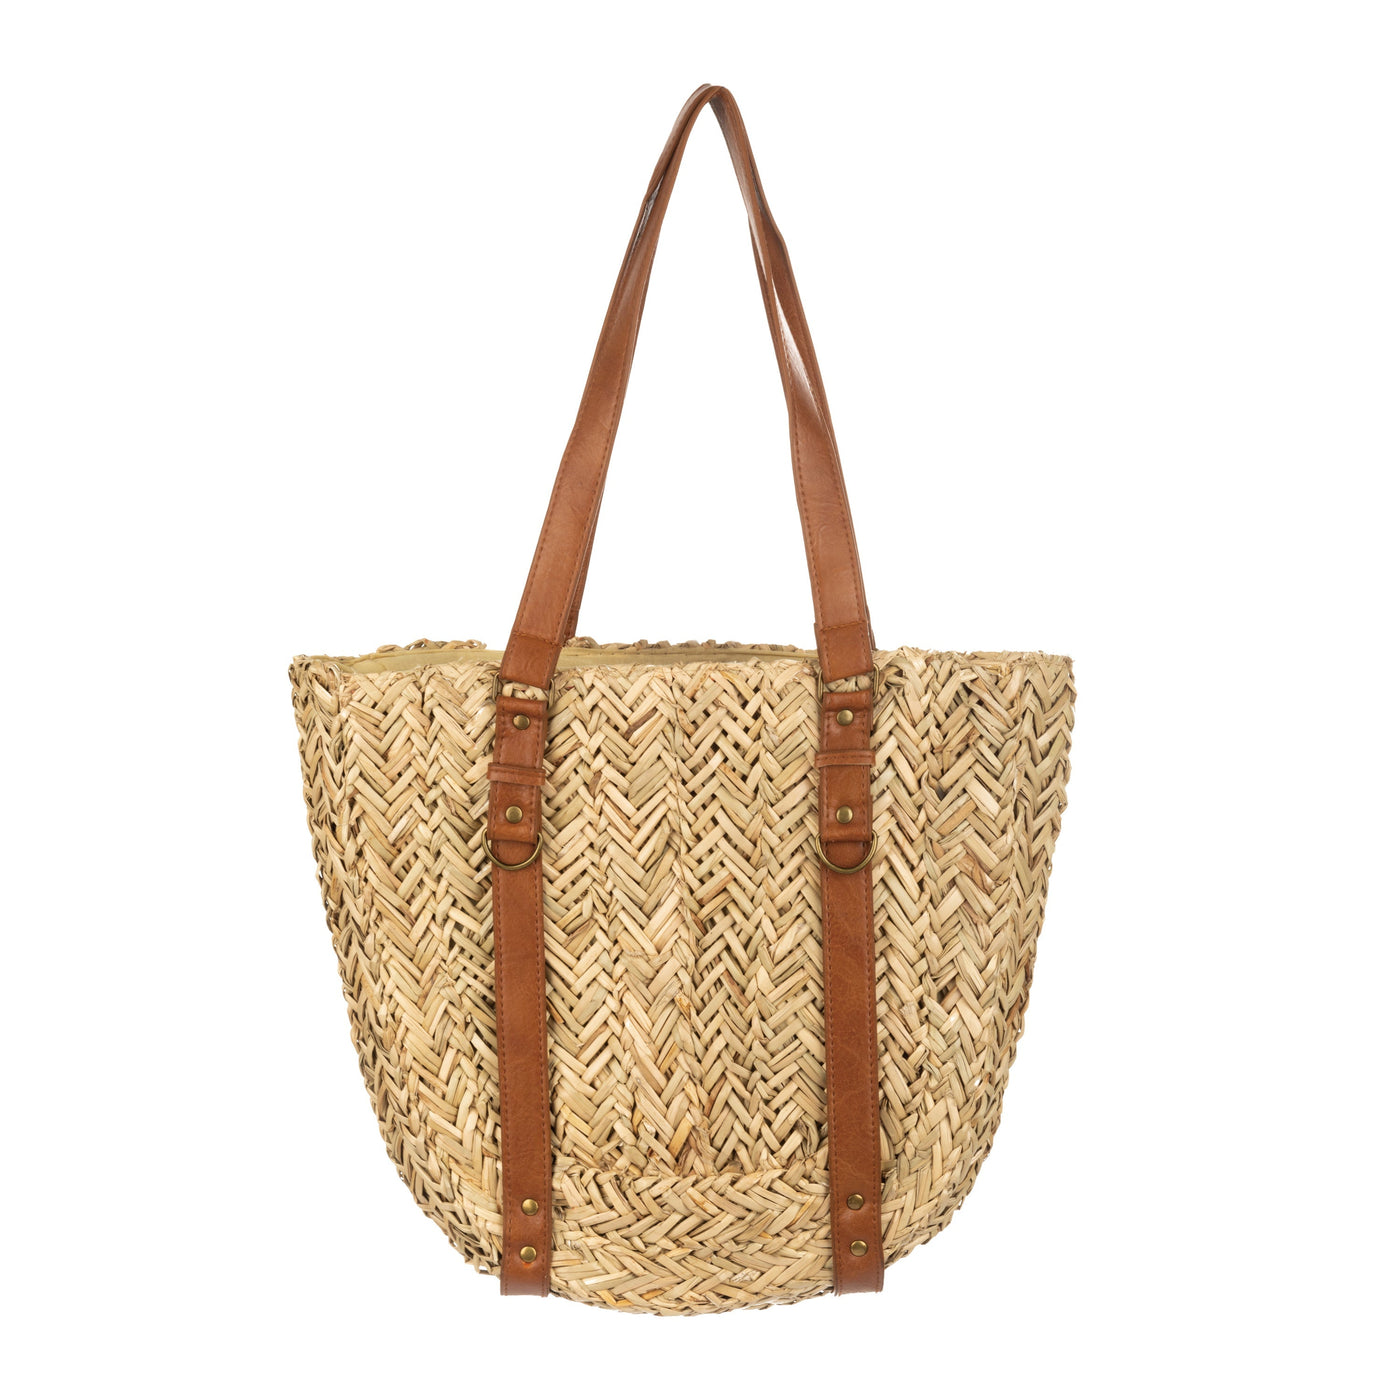 TOTE - The Jolie Everyday Tote